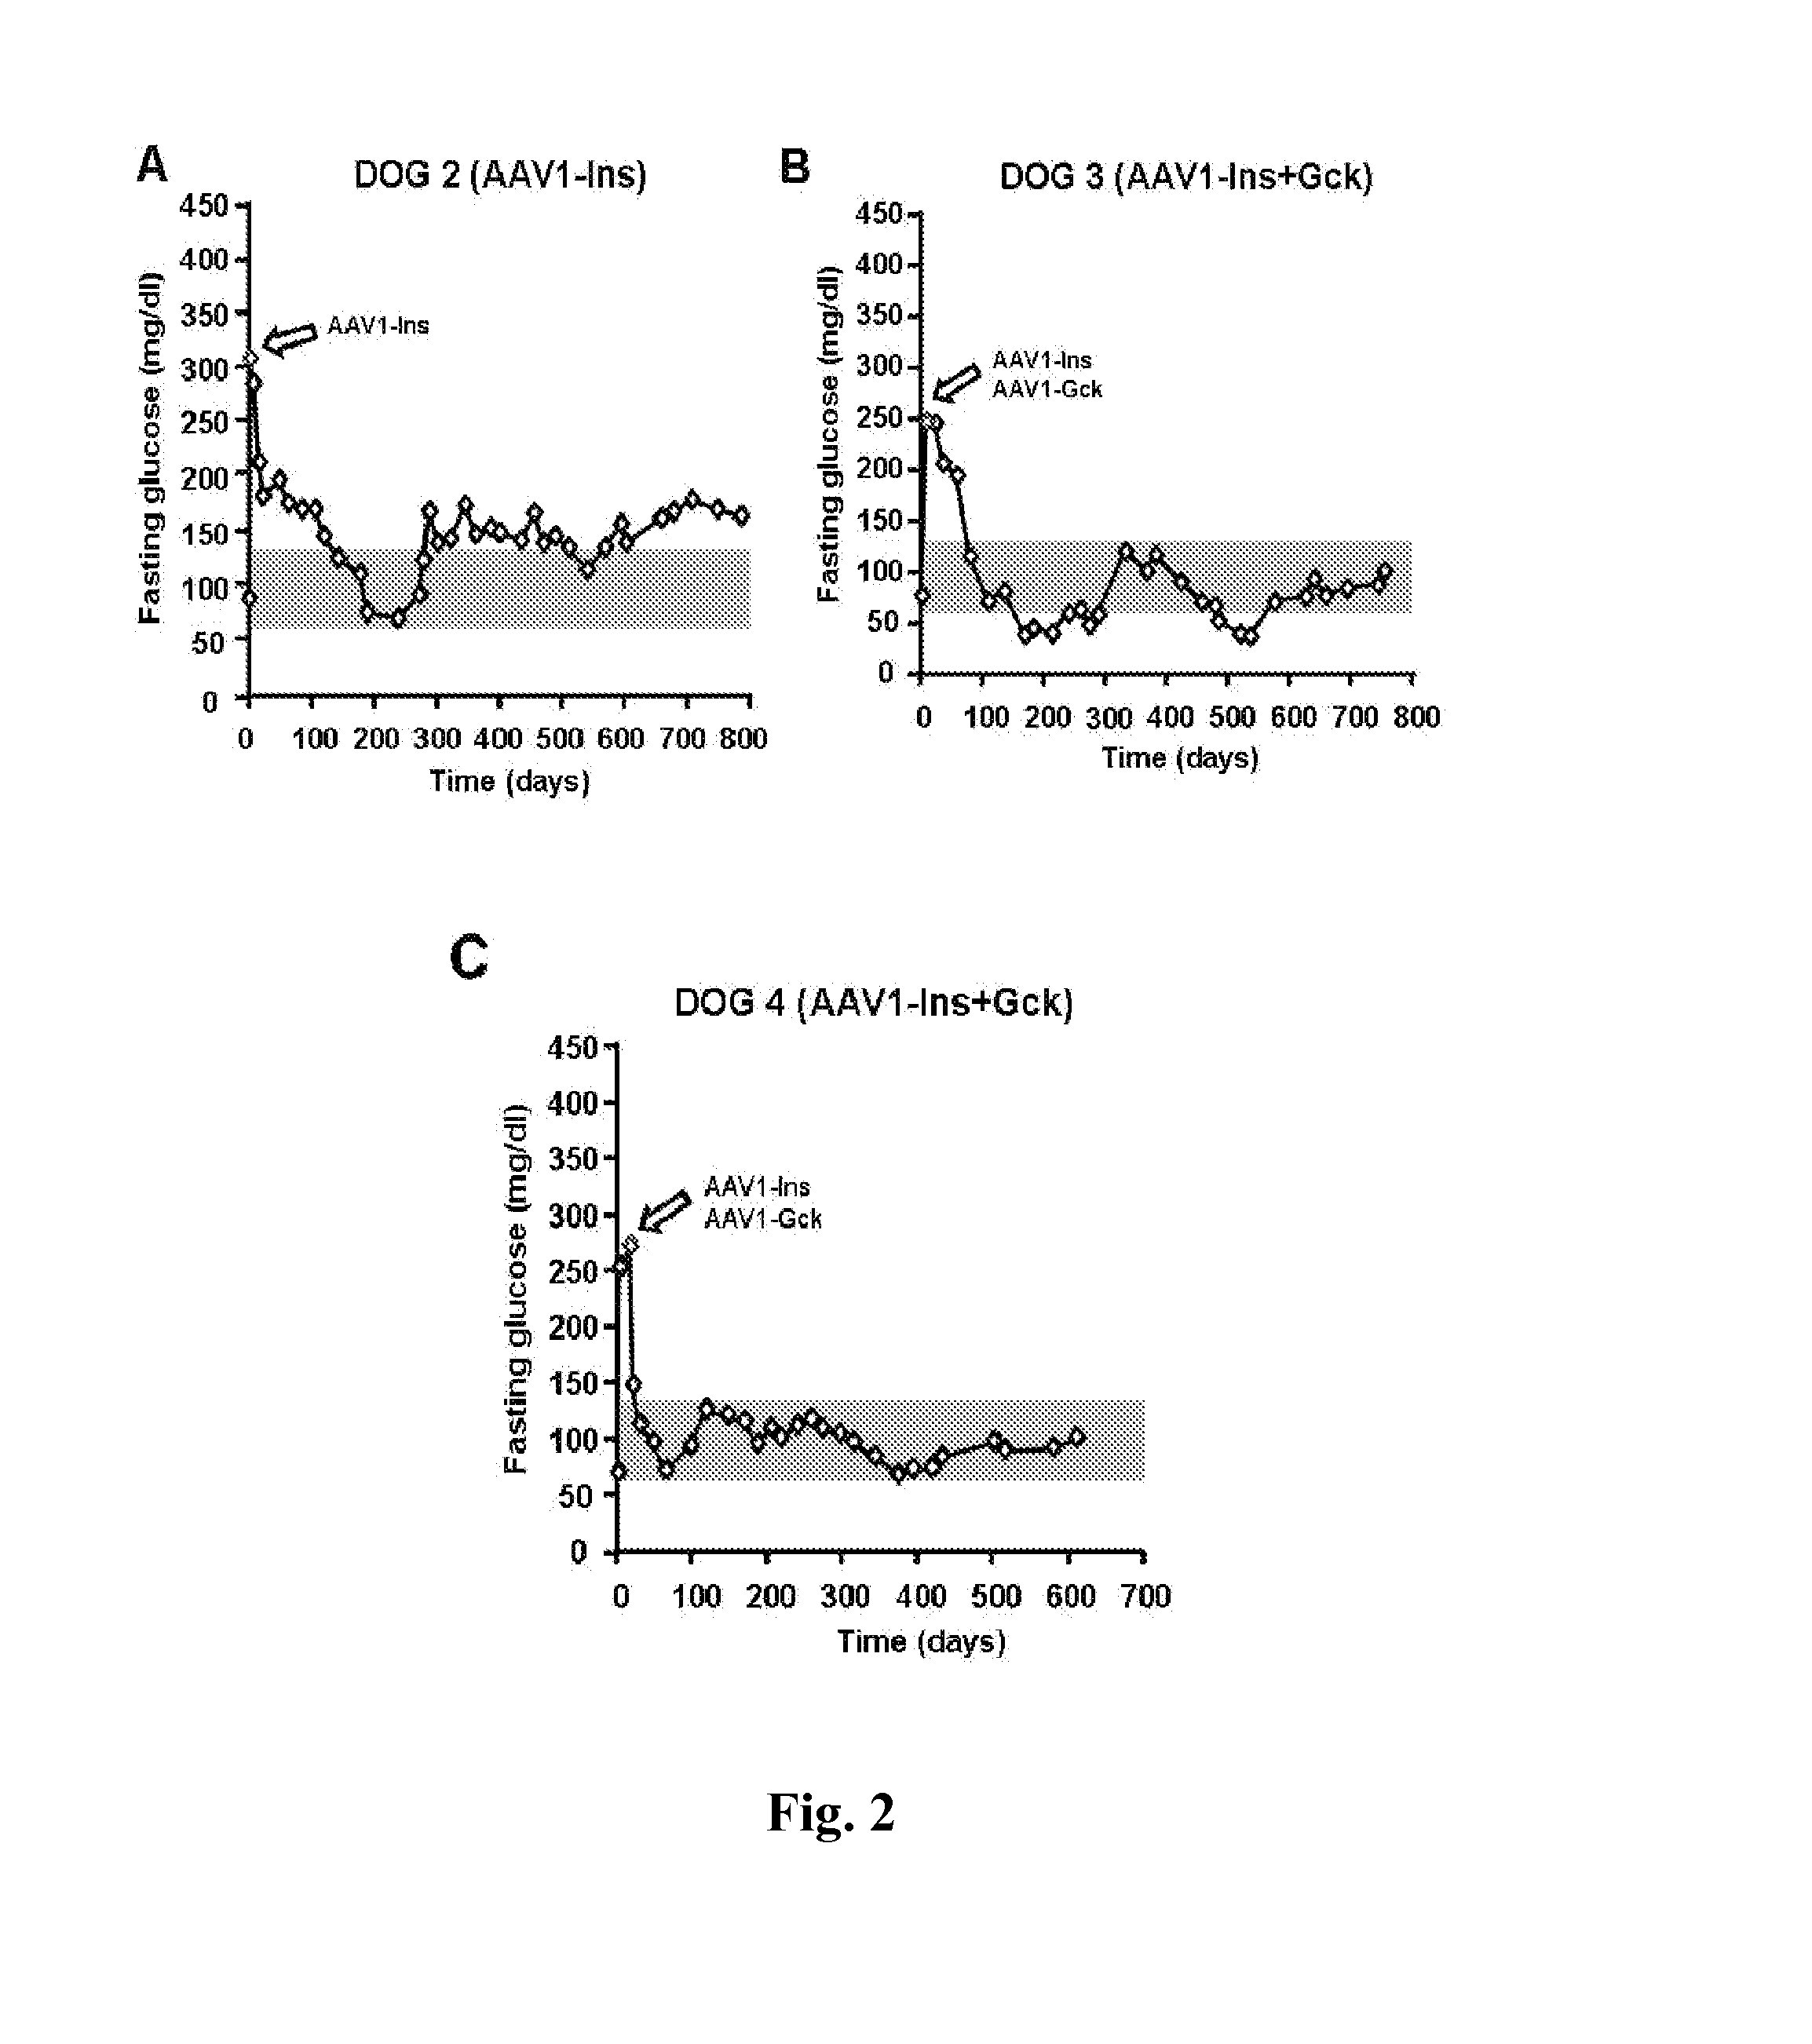 Gene therapy composition for use in diabetes treatment